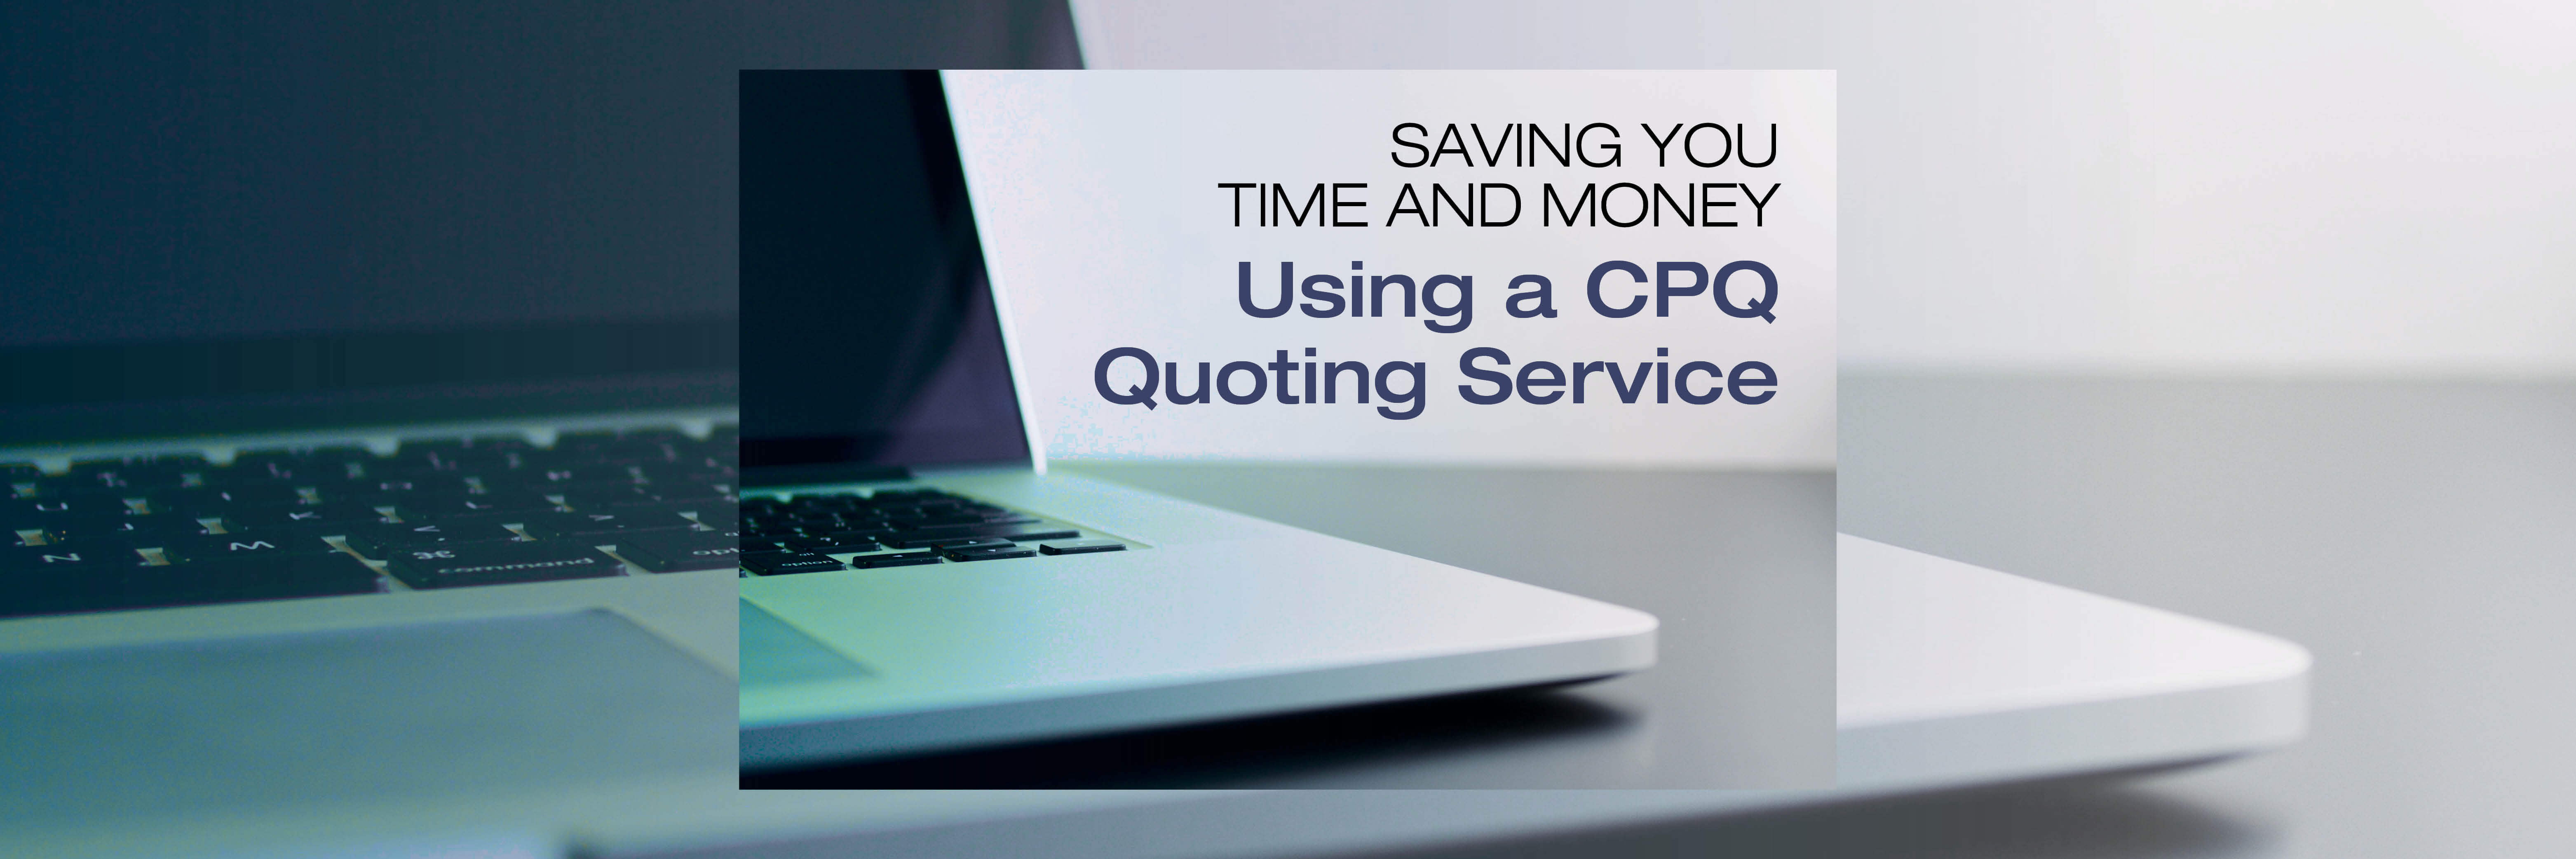 Saving You Time and Money Using a CPQ Quoting Service